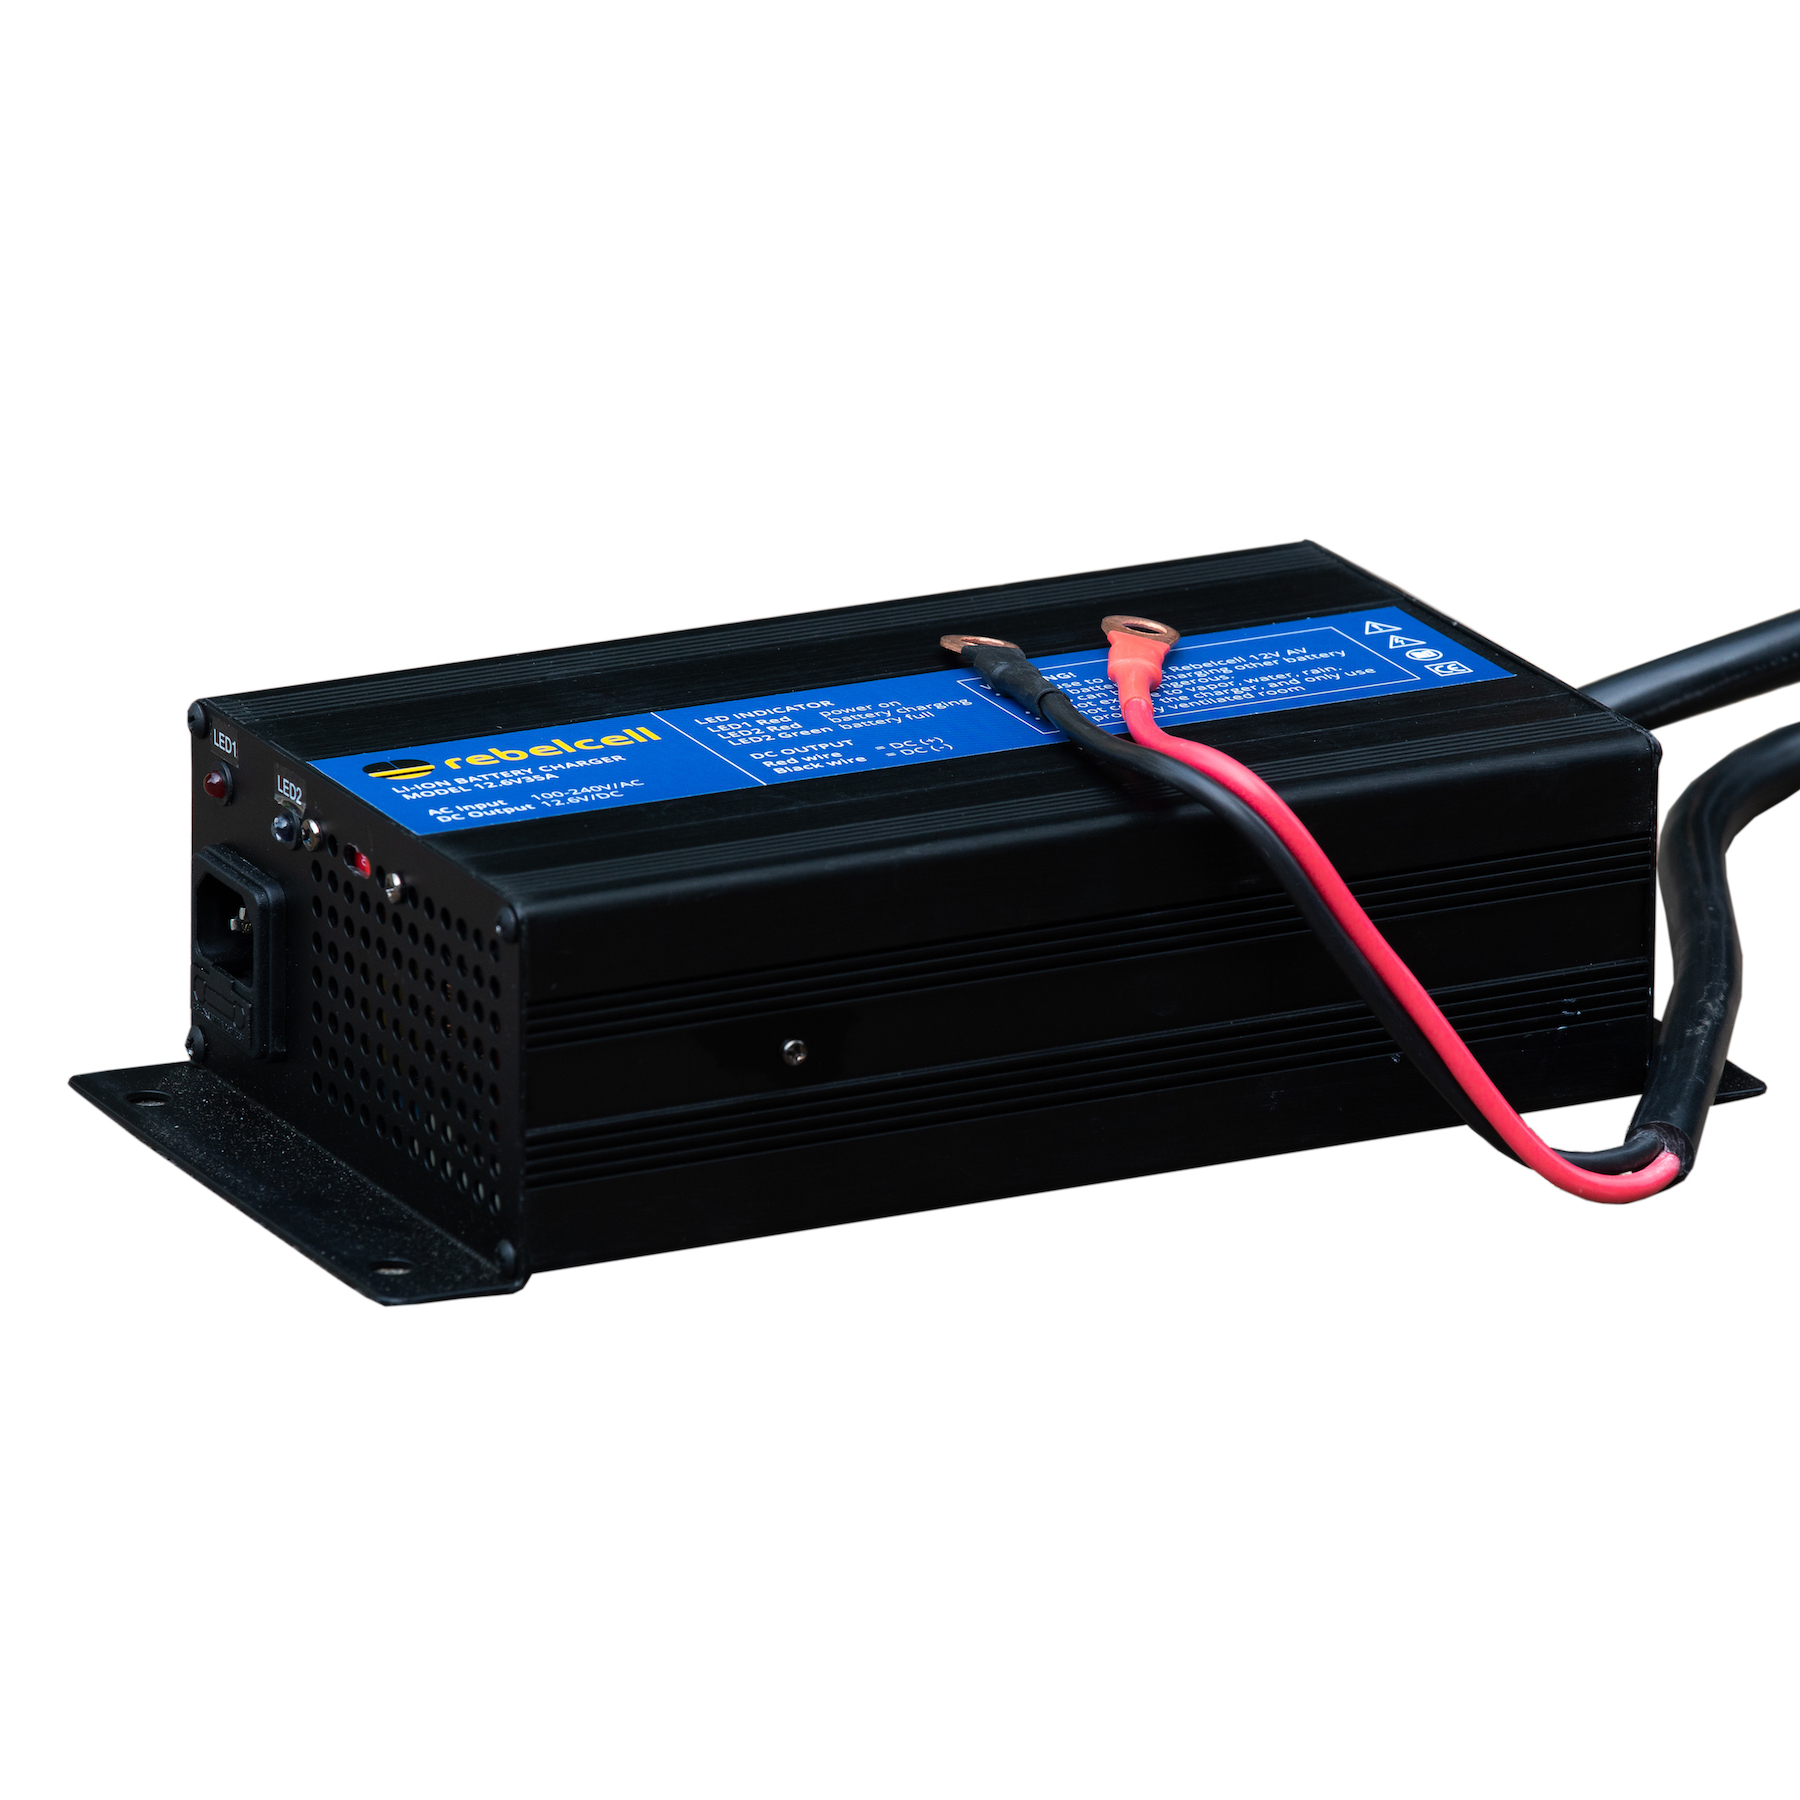 Rebelcell charger 12.6V35A product image